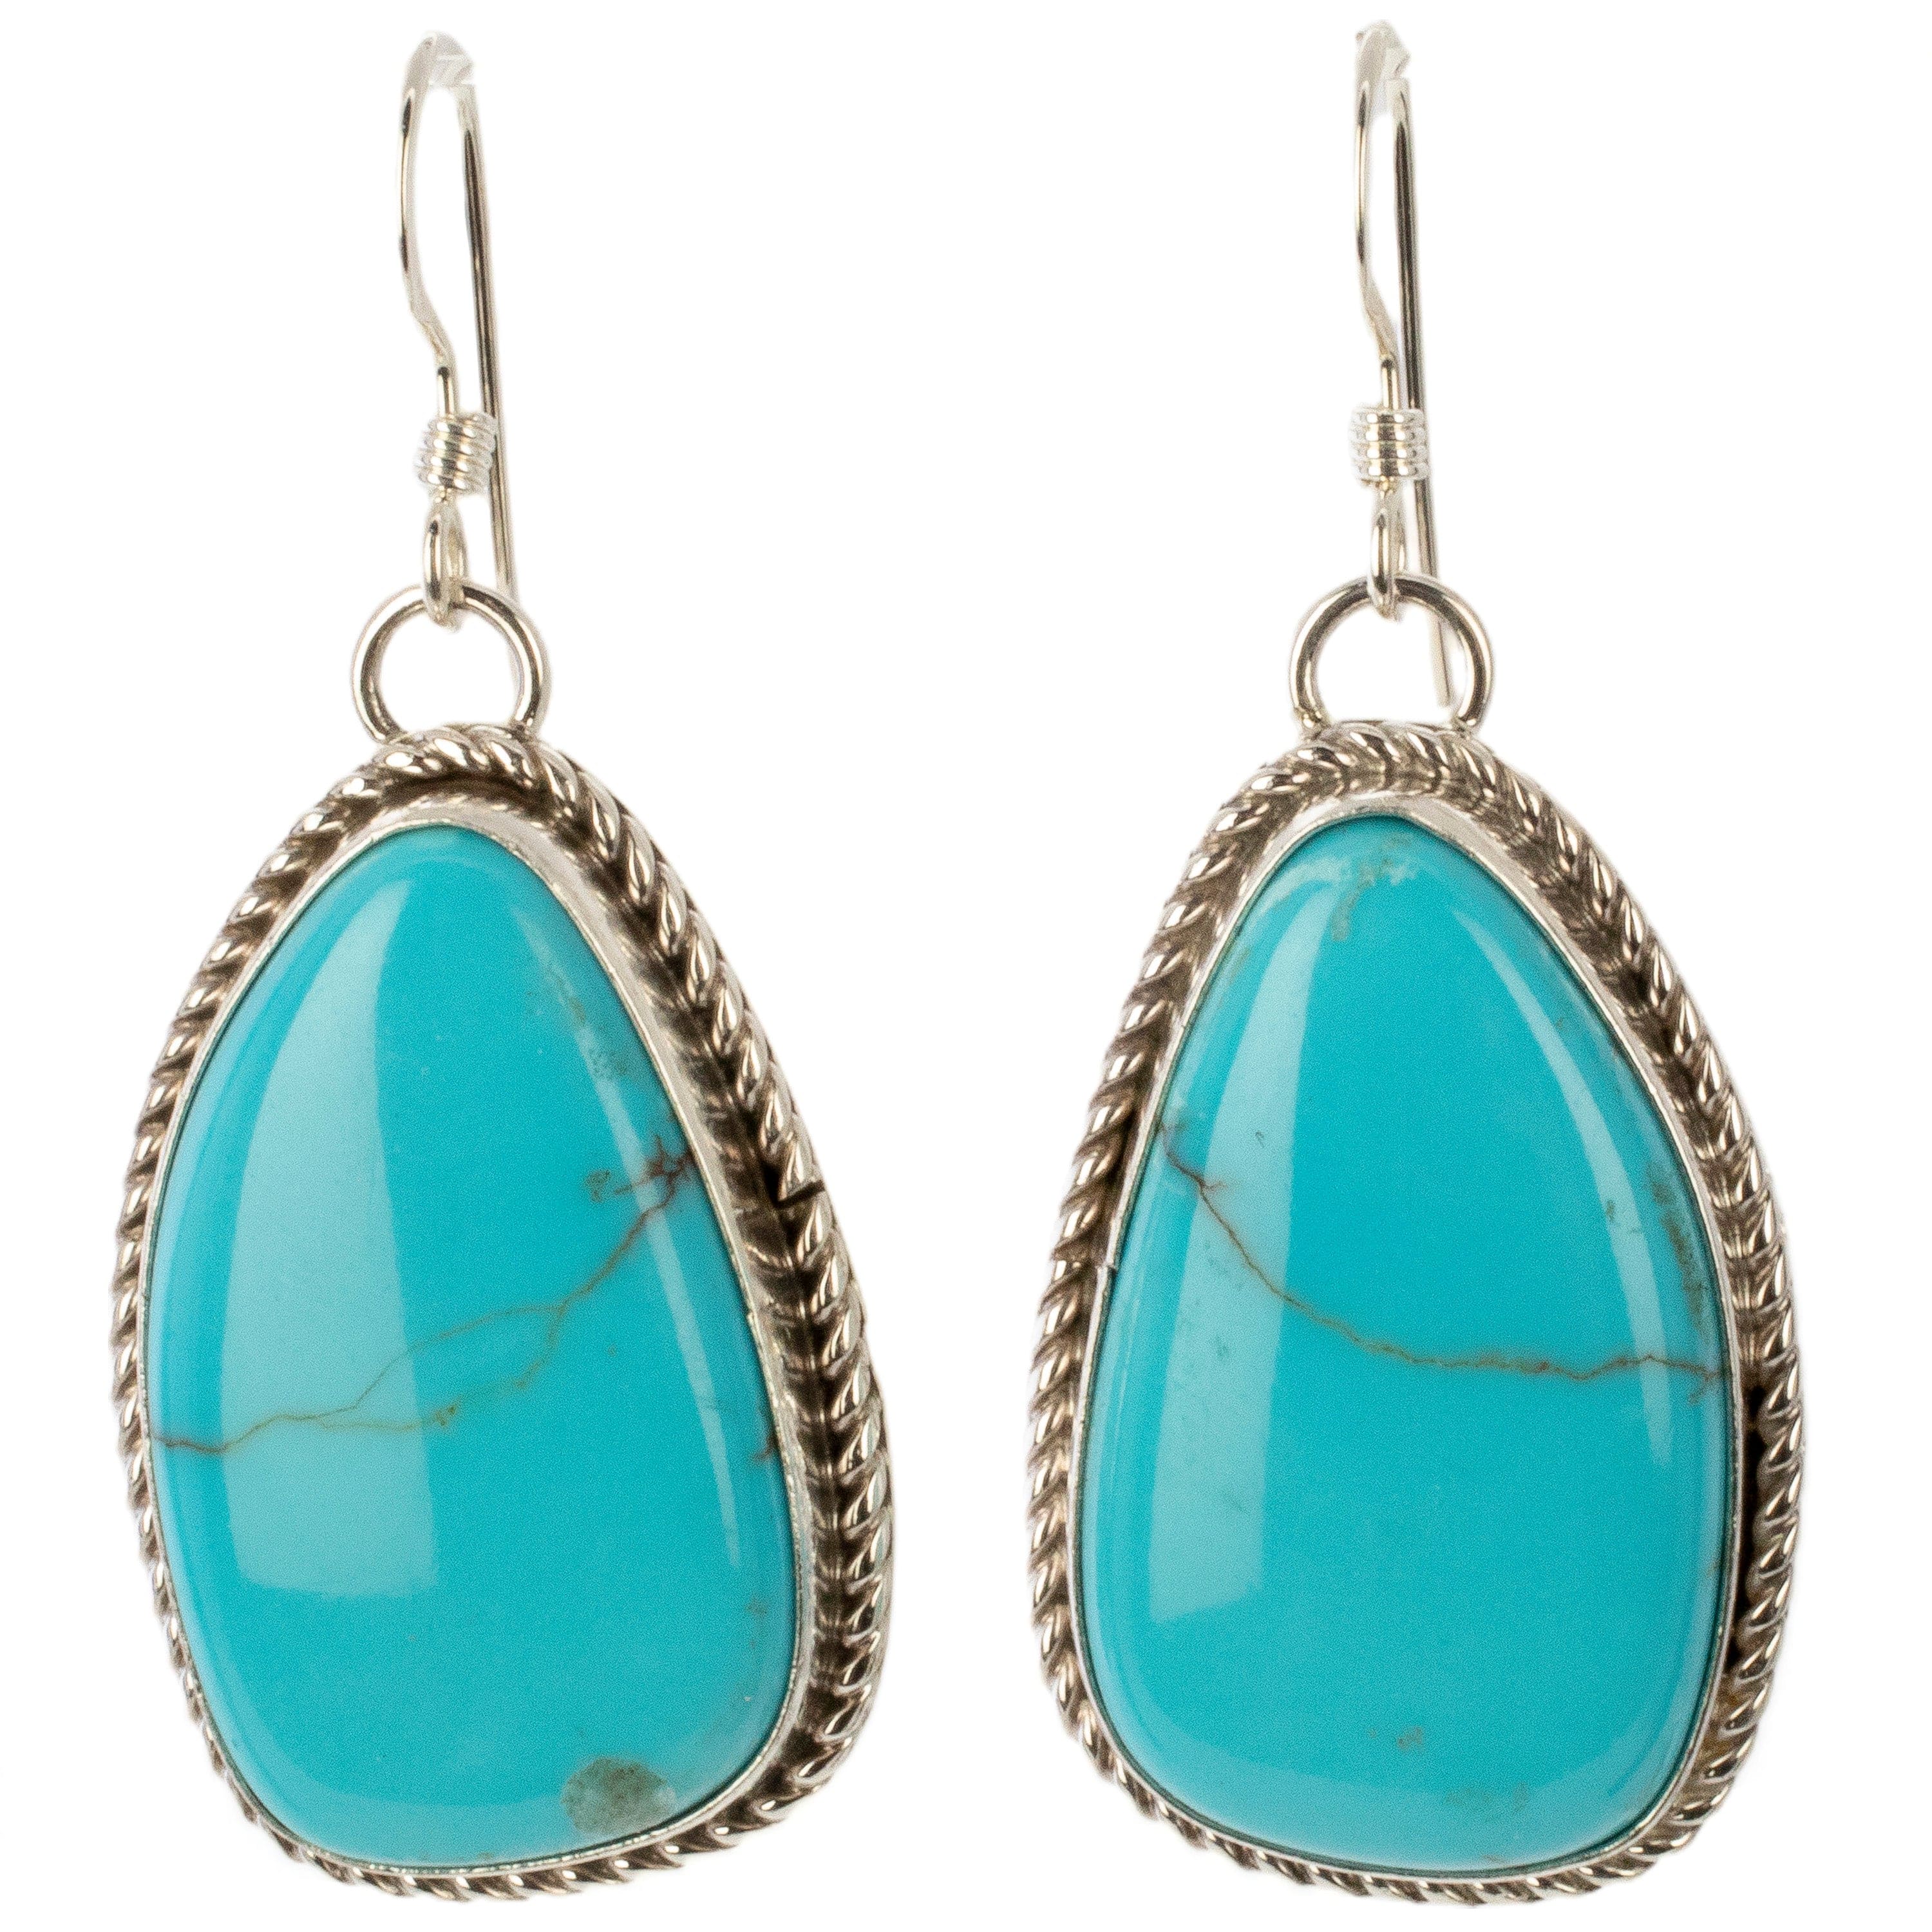 Kalifano Native American Jewelry Kingman Turquoise USA Native American Made 925 Sterling Silver Dangly Earrings with French Hook NAE600.016